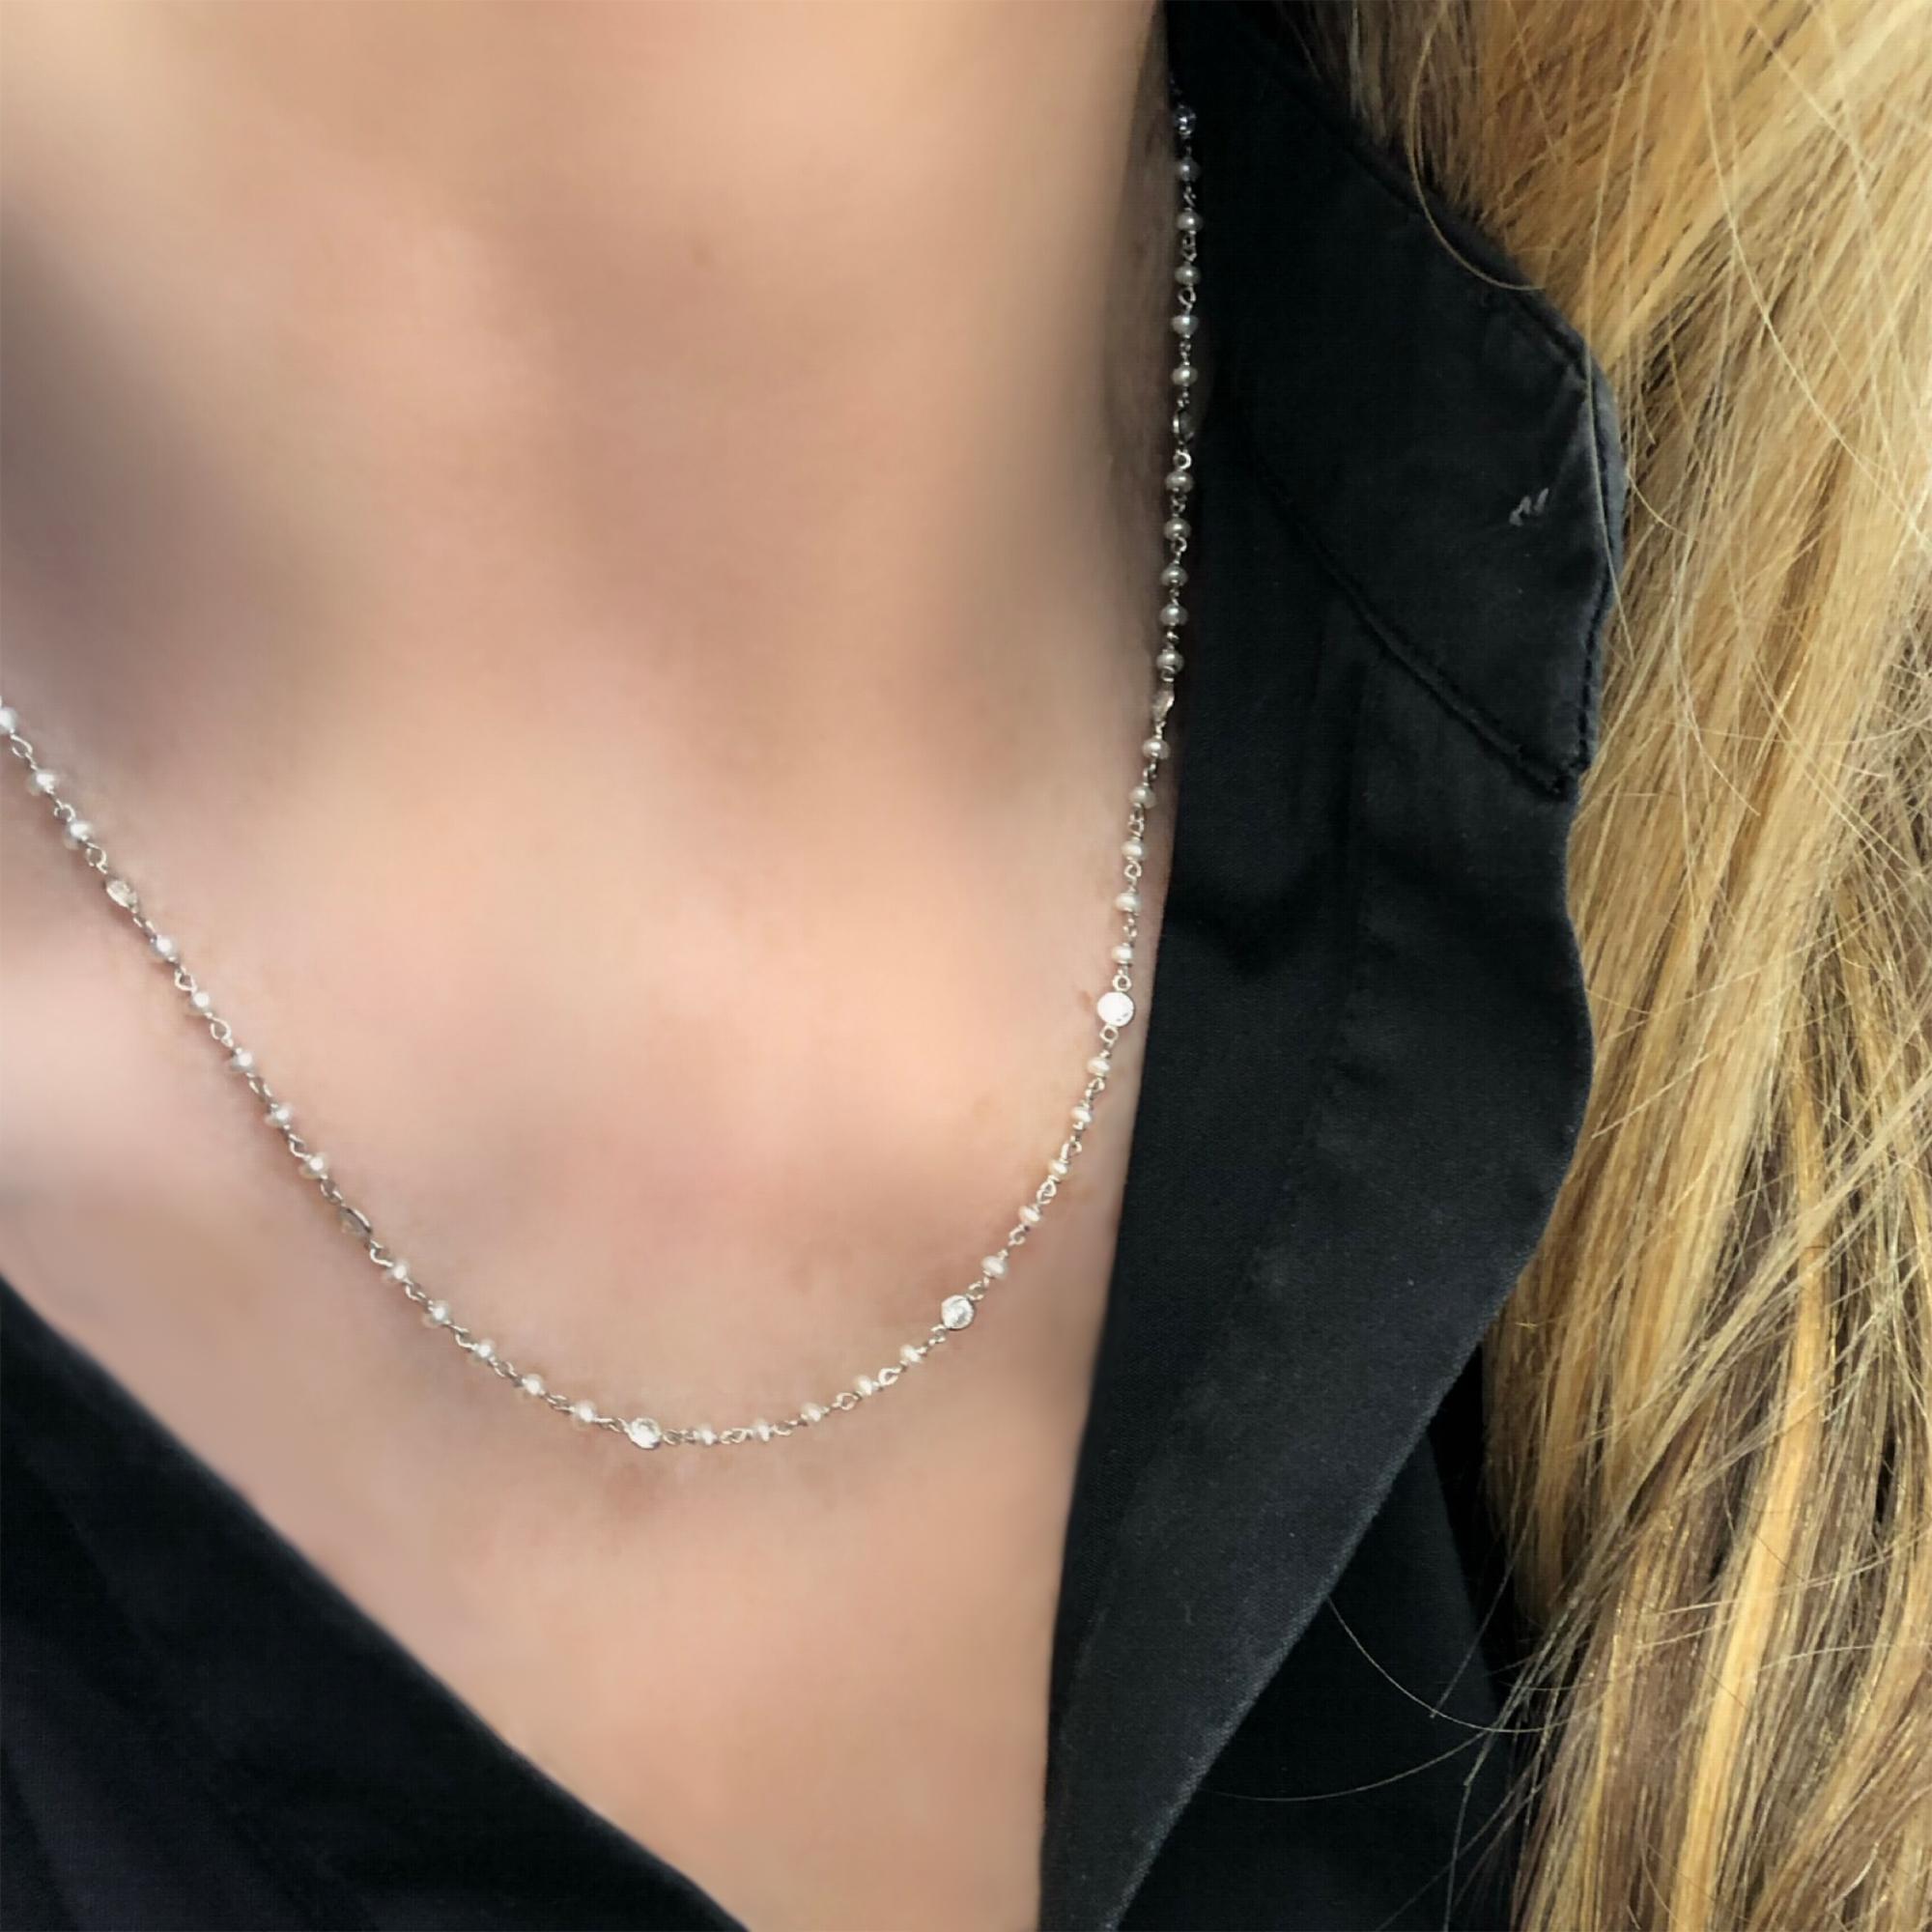 Women's or Men's Rosaria Varra Seed Pearl and Diamond Necklace set in Platinum